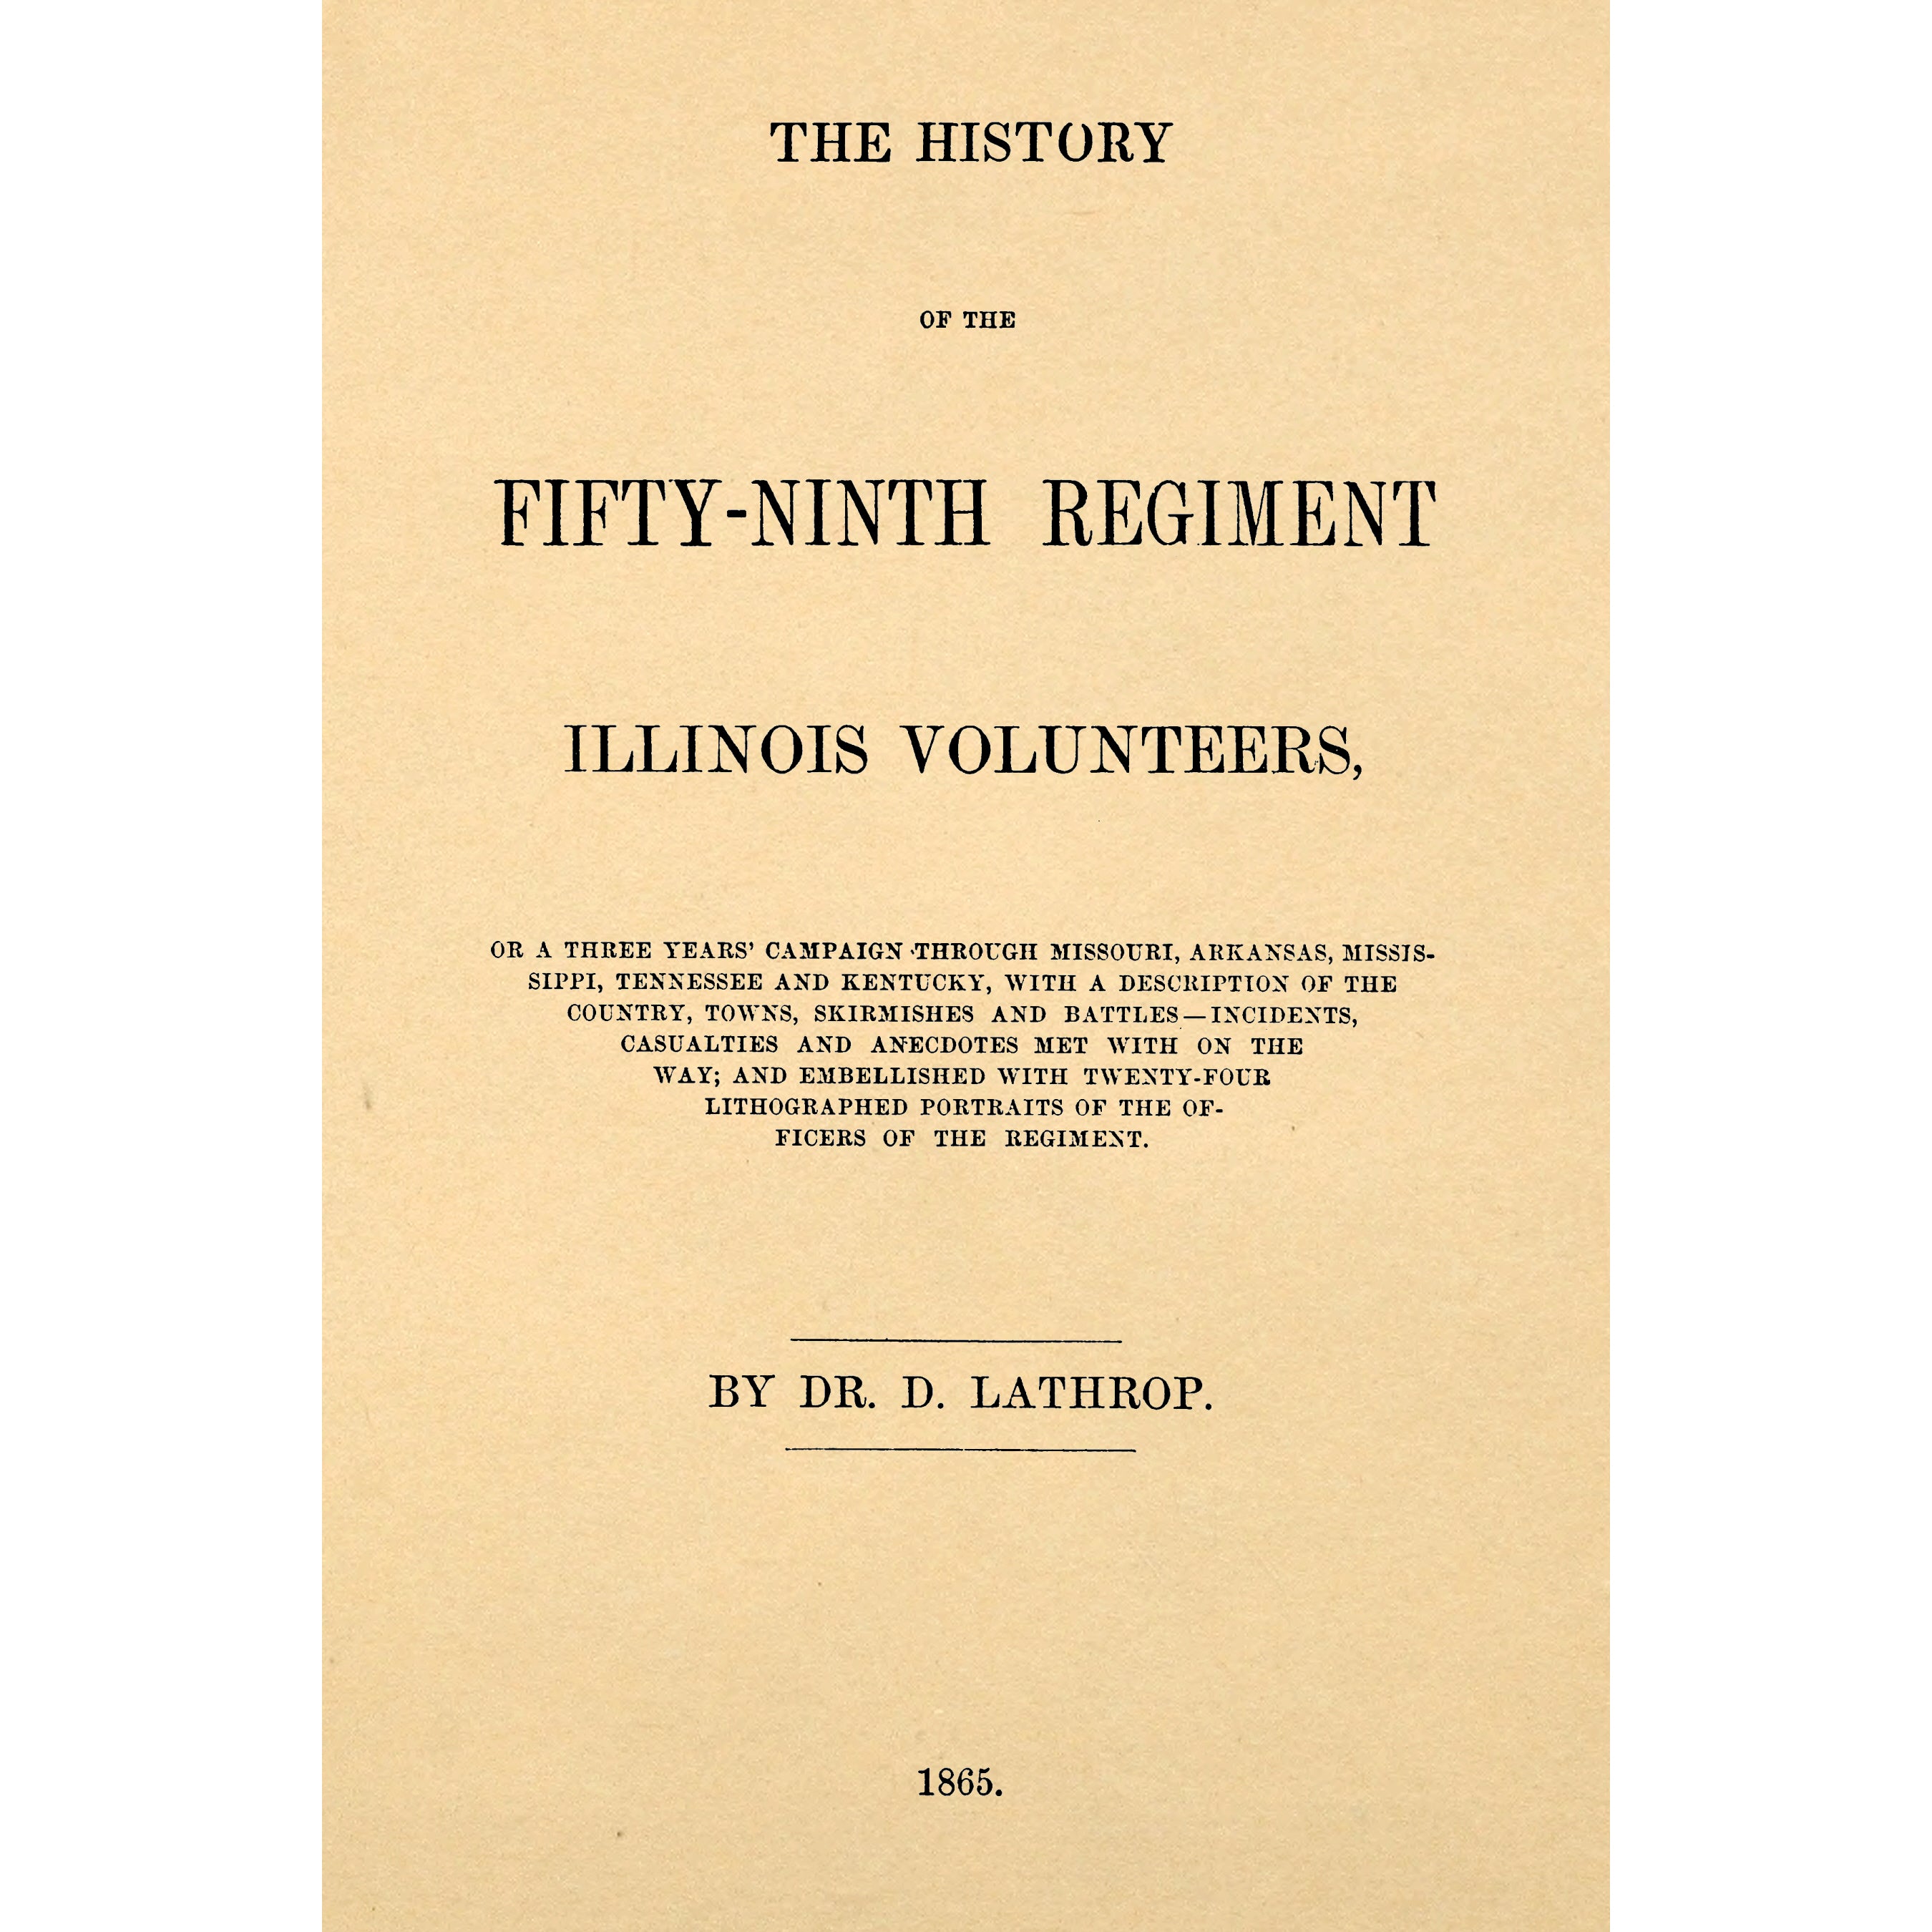 The history of the Fifty-Ninth Regiment Illinois Volunteers.